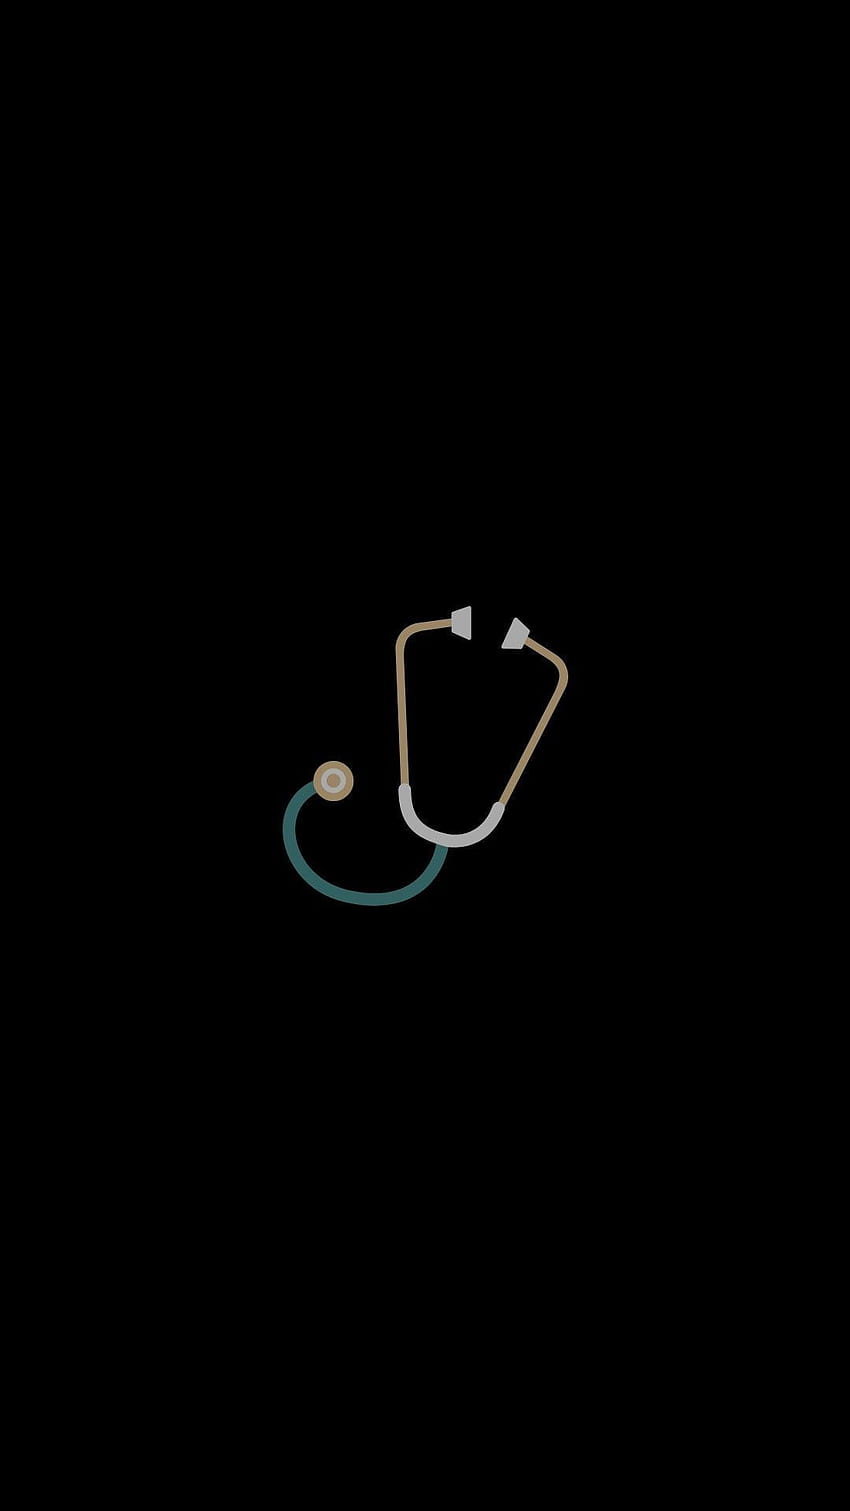 A stethoscope and watch on black background - 